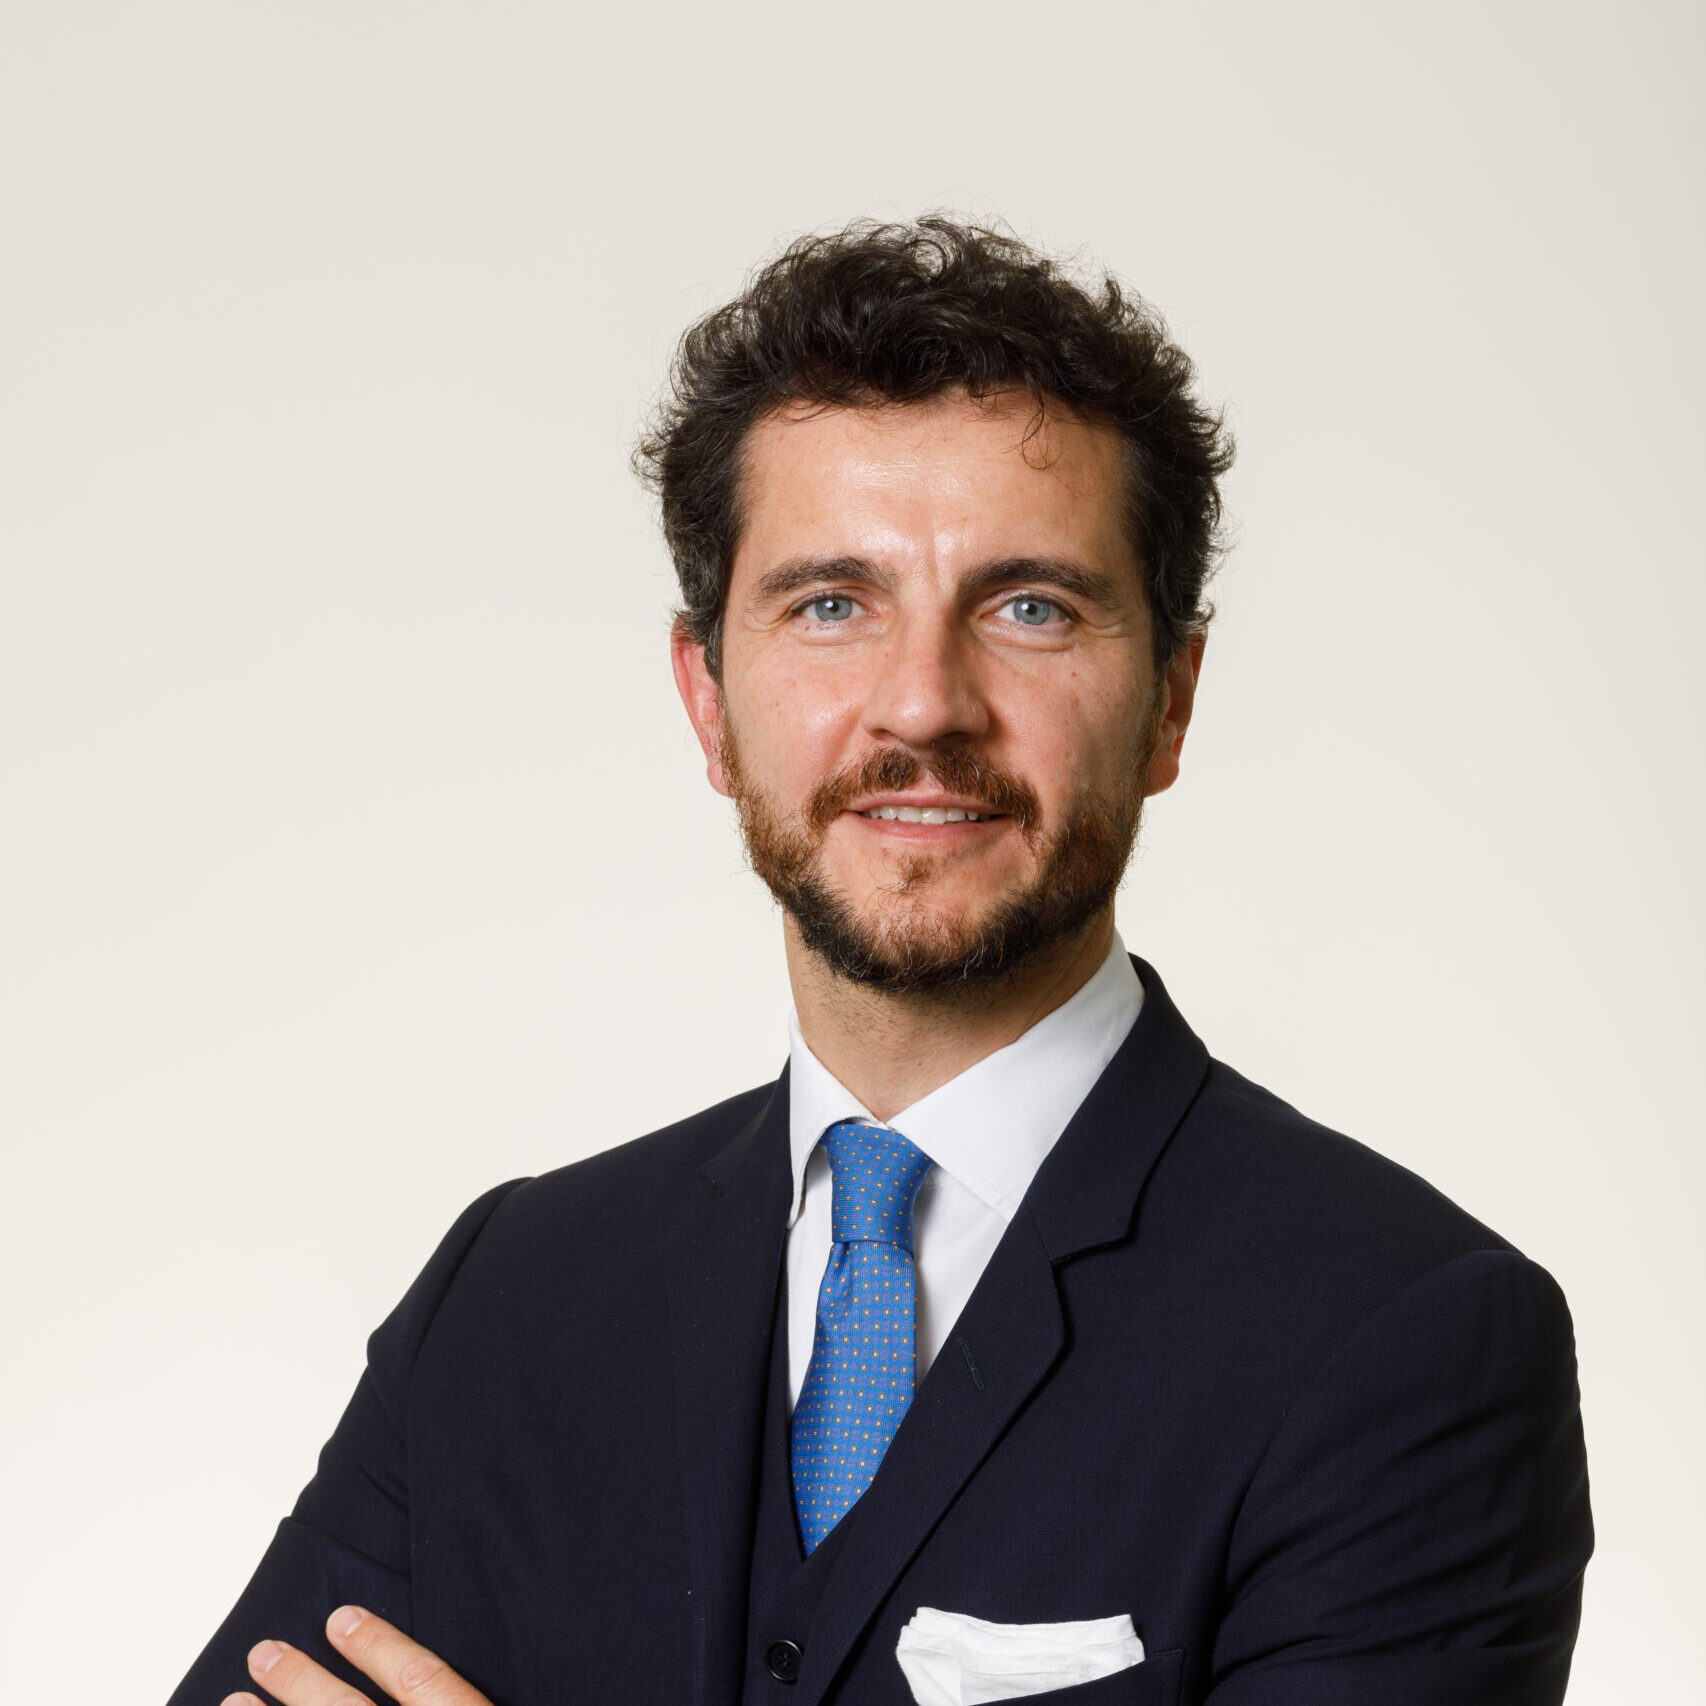 <span style='line-height: 0.6'>Riccardo Paulotto</span><br />
<span style='color:#00b5e2;font-size:25px;line-height: 0.6 !important;'><br />
Fund Manager & Structured Finance Senior Manager of Fund</span>